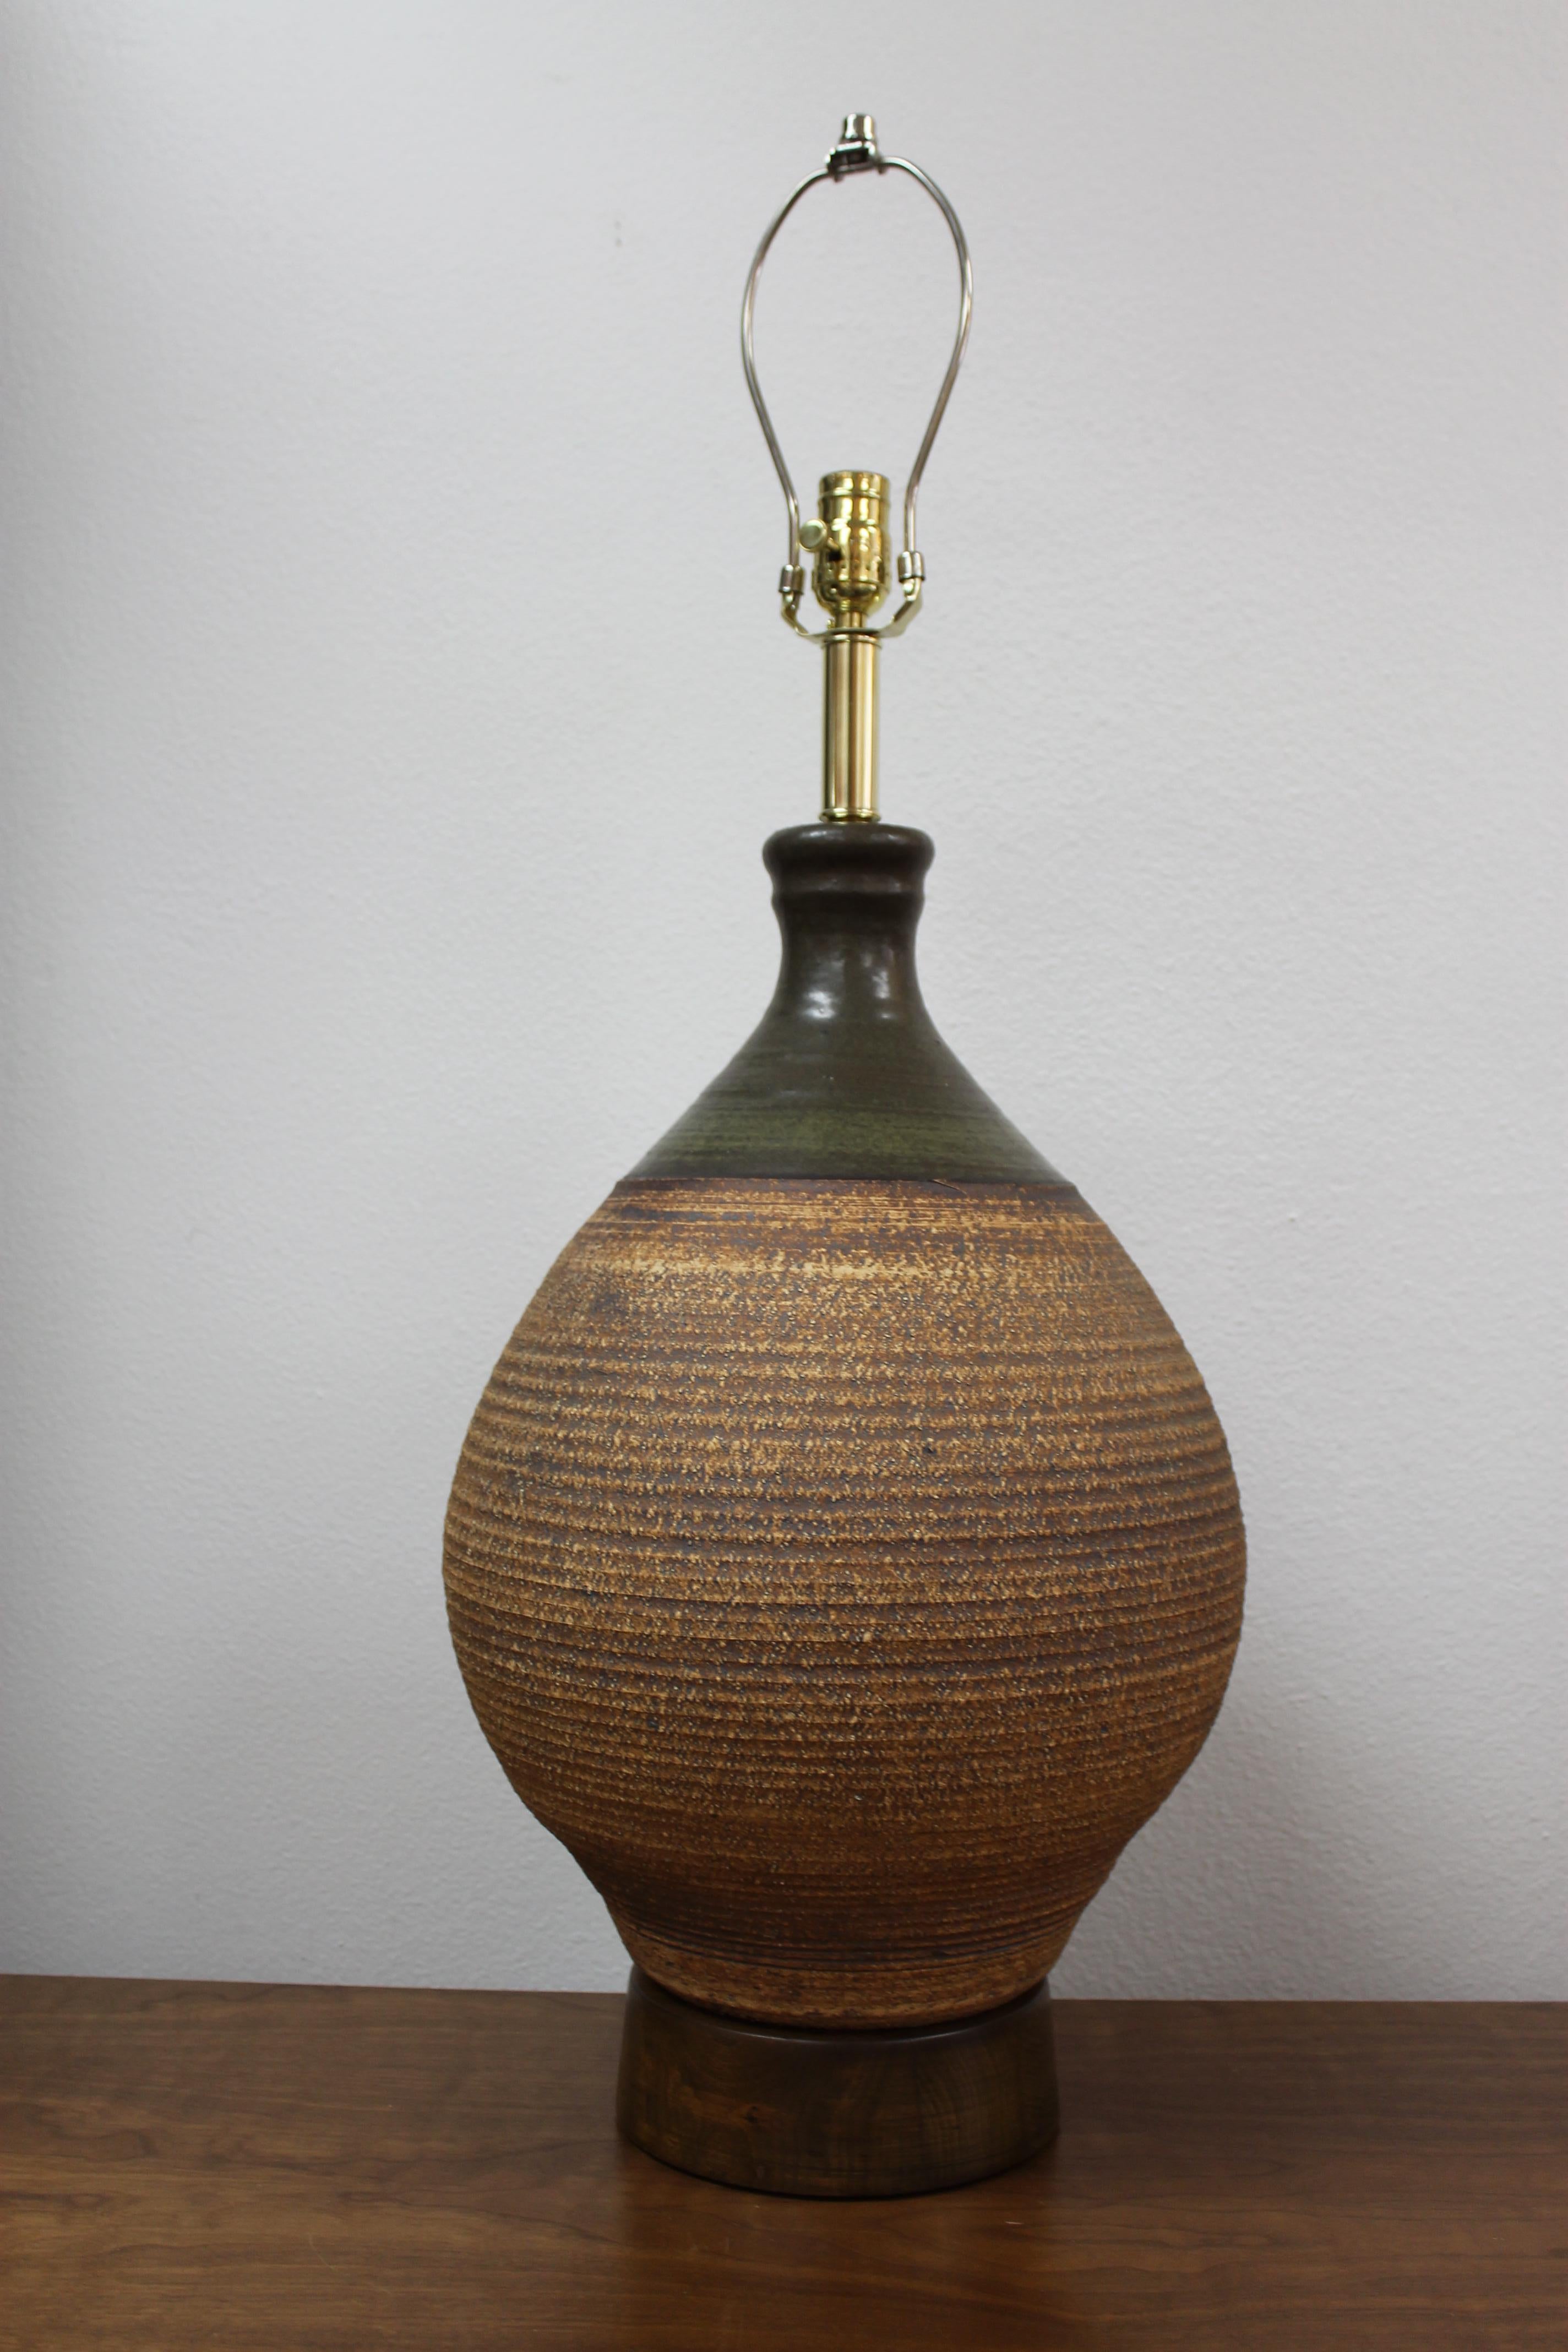 Ceramic lamp by Bob Kinzie for the Affiliated Craftsmen Lamp Company of Costa Mesa, CA. Ceramic portion is 19.5” high and 13.5